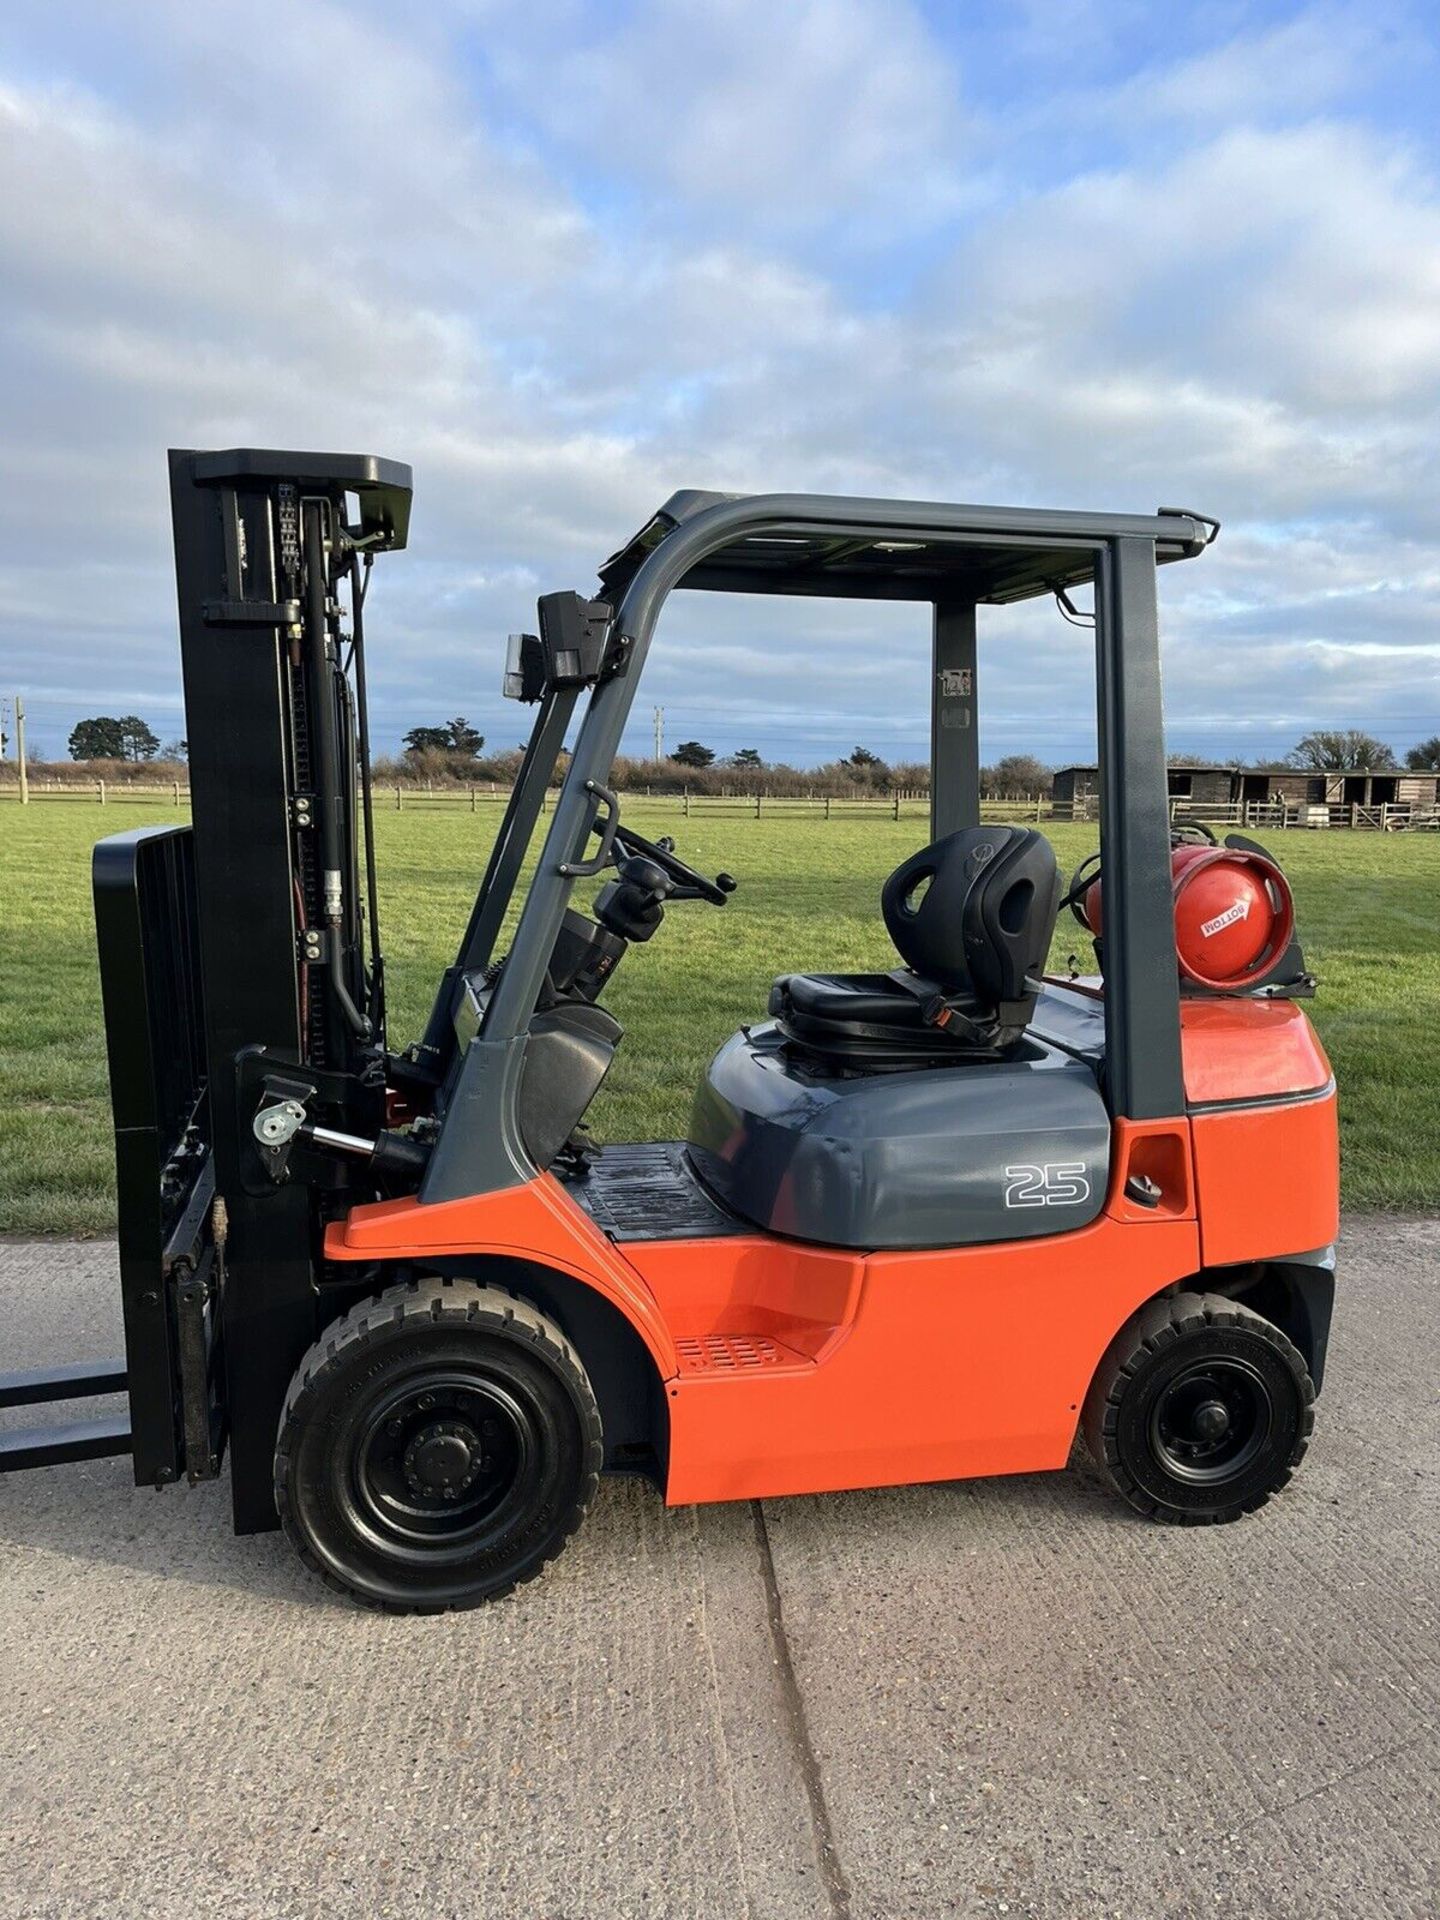 Toyota forklift truck - Image 3 of 5